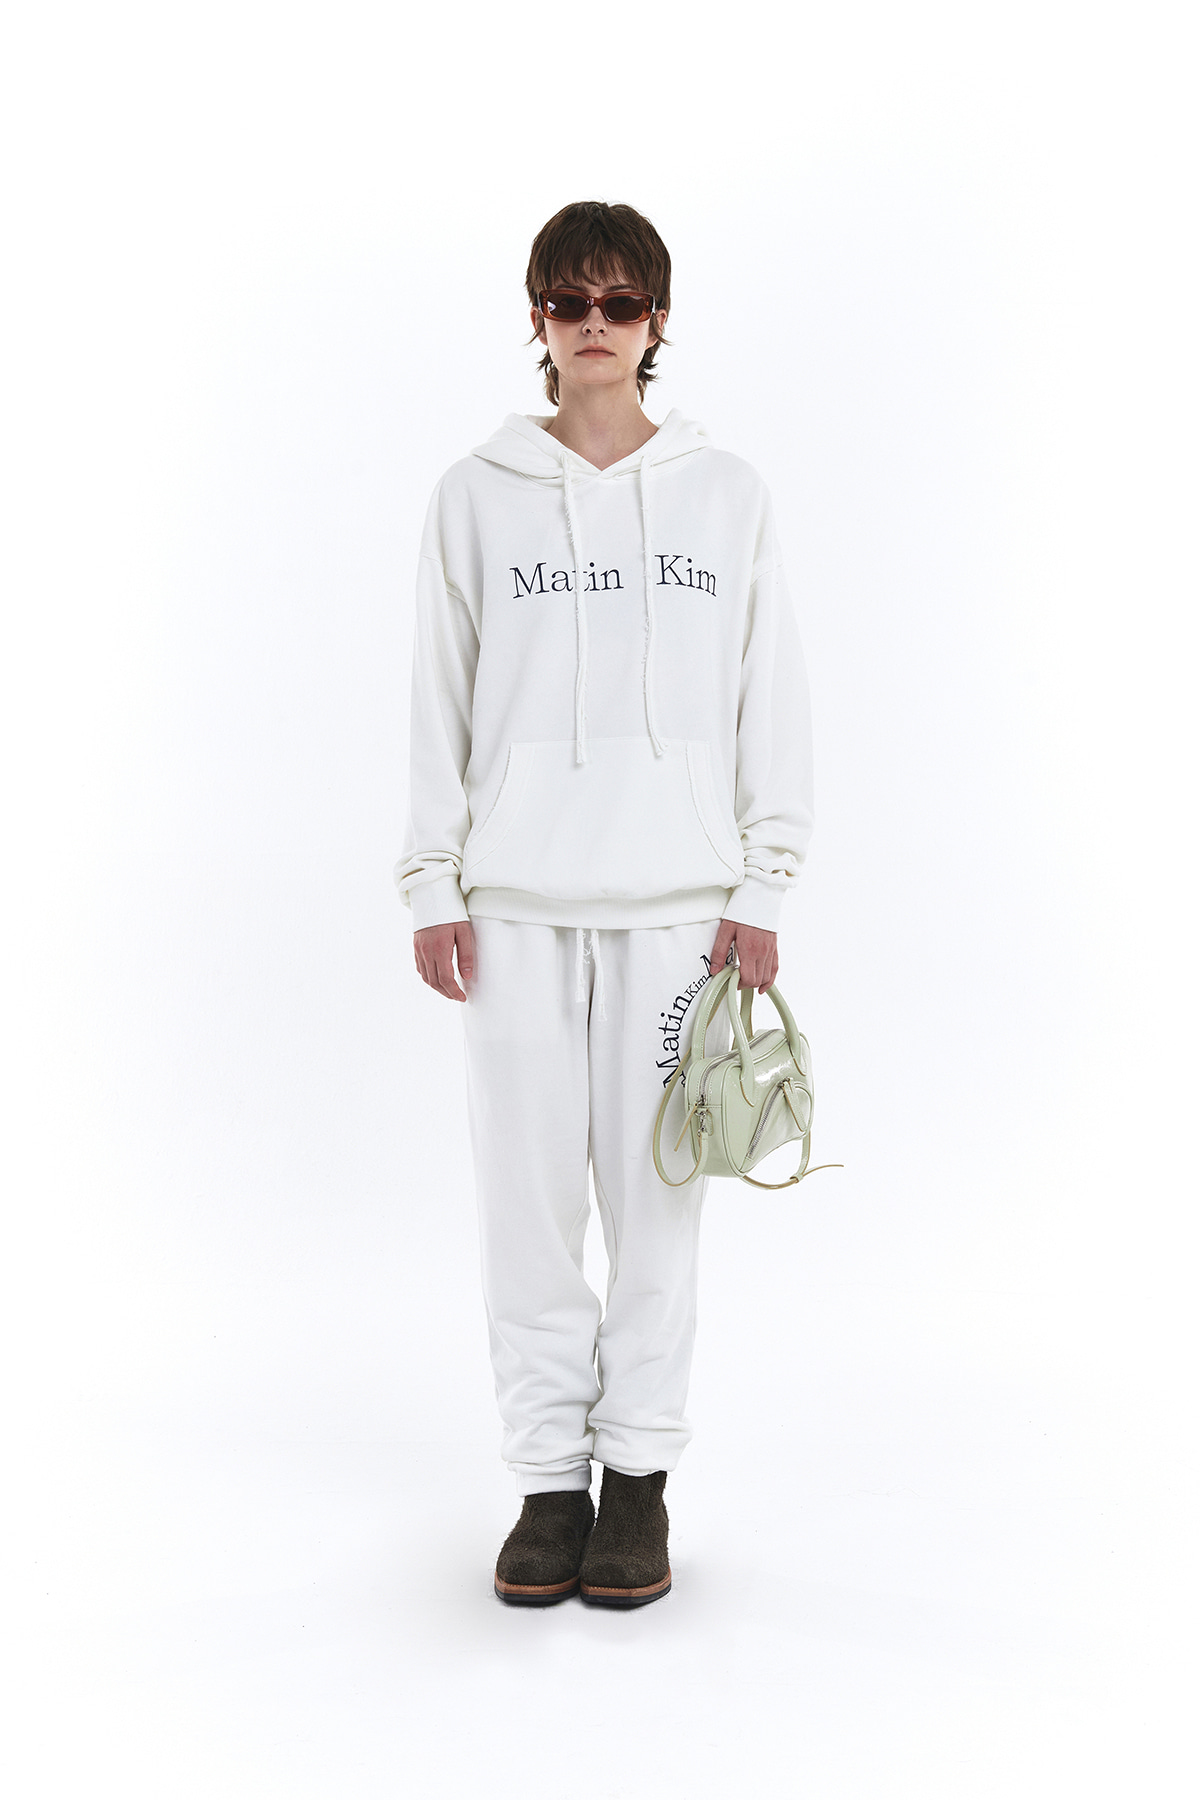 MATIN SOLID LOGO JOGGER PANTS IN WHITE